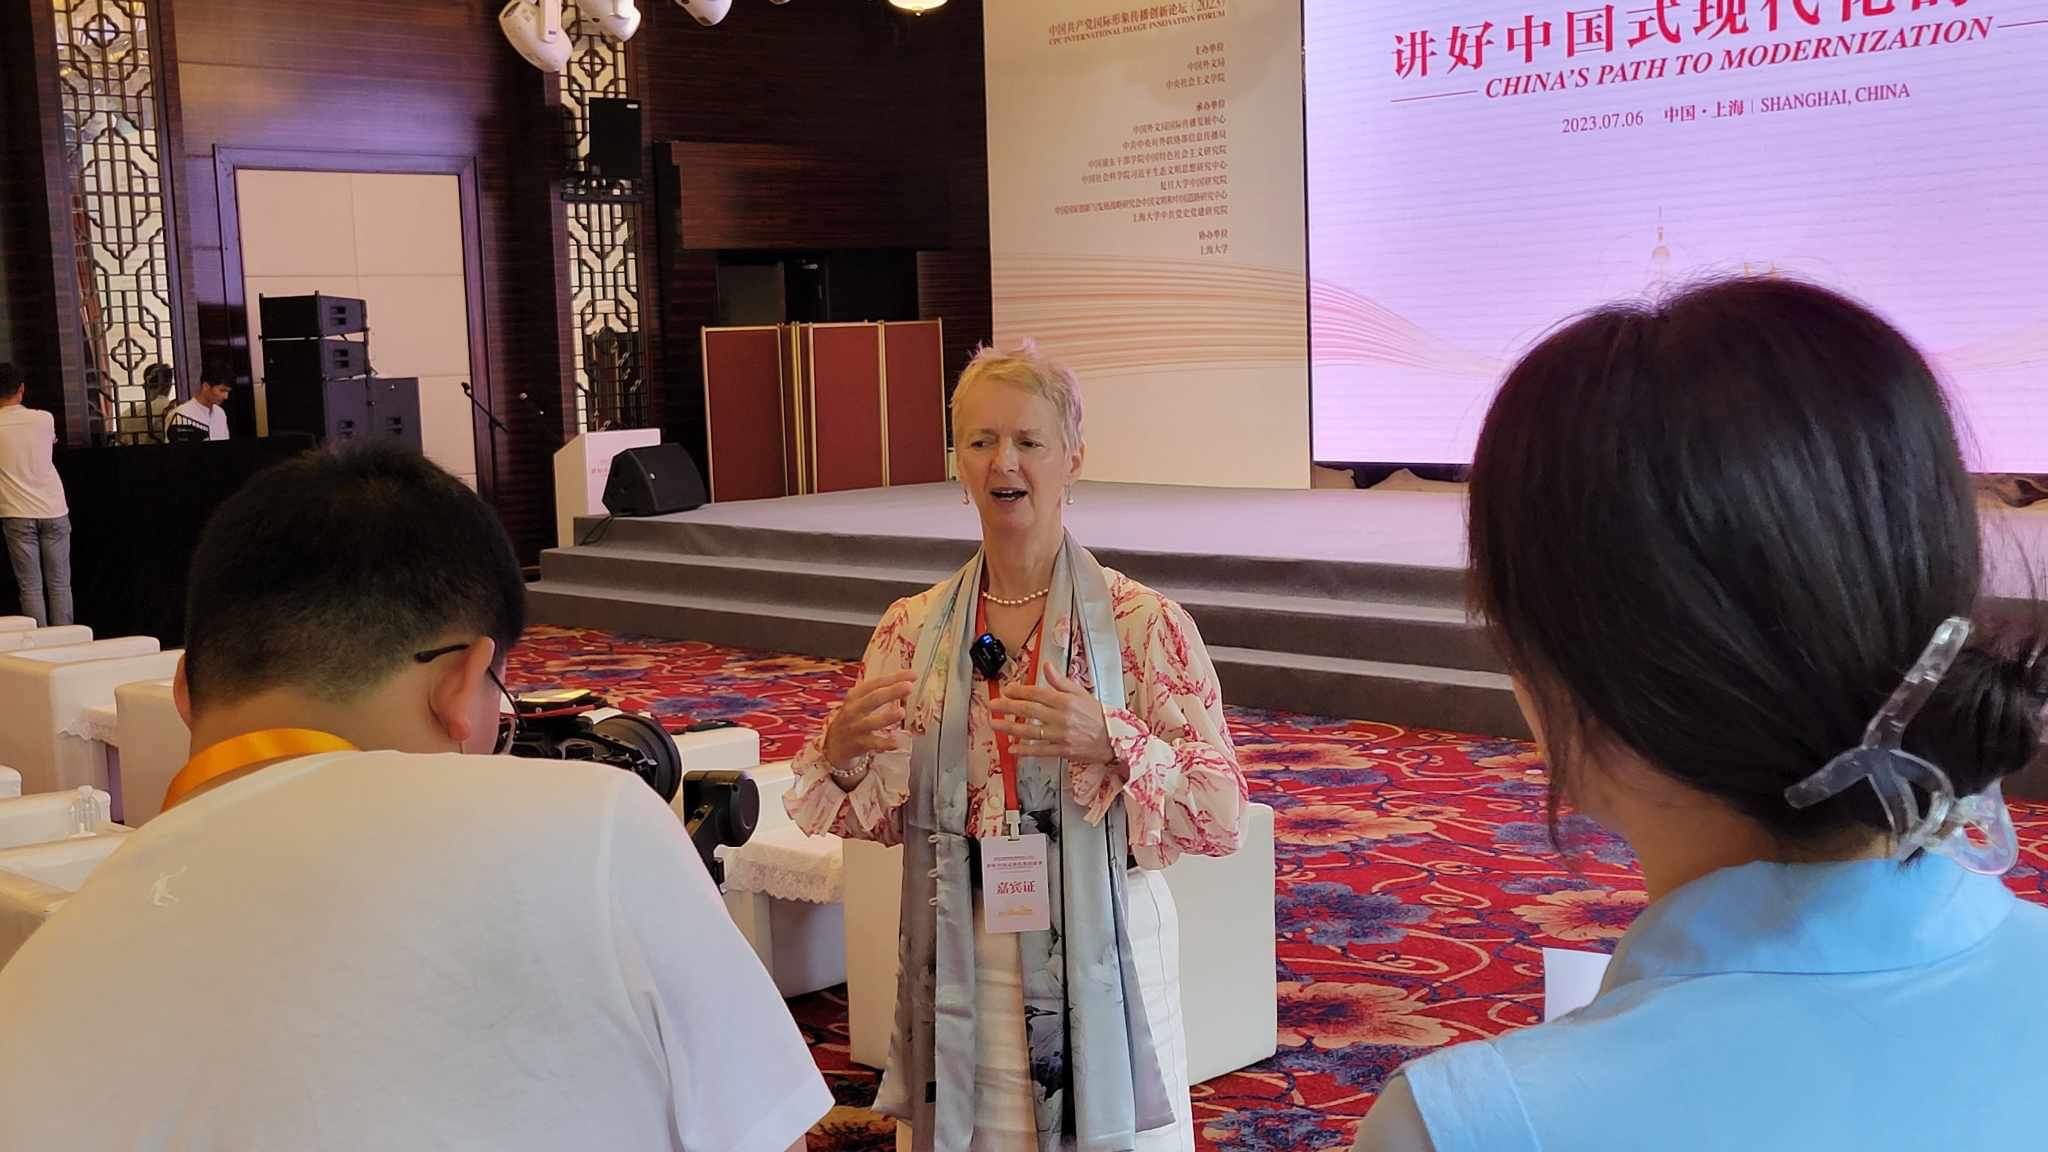 Rose being interviewed by the Beijing Review at the conference